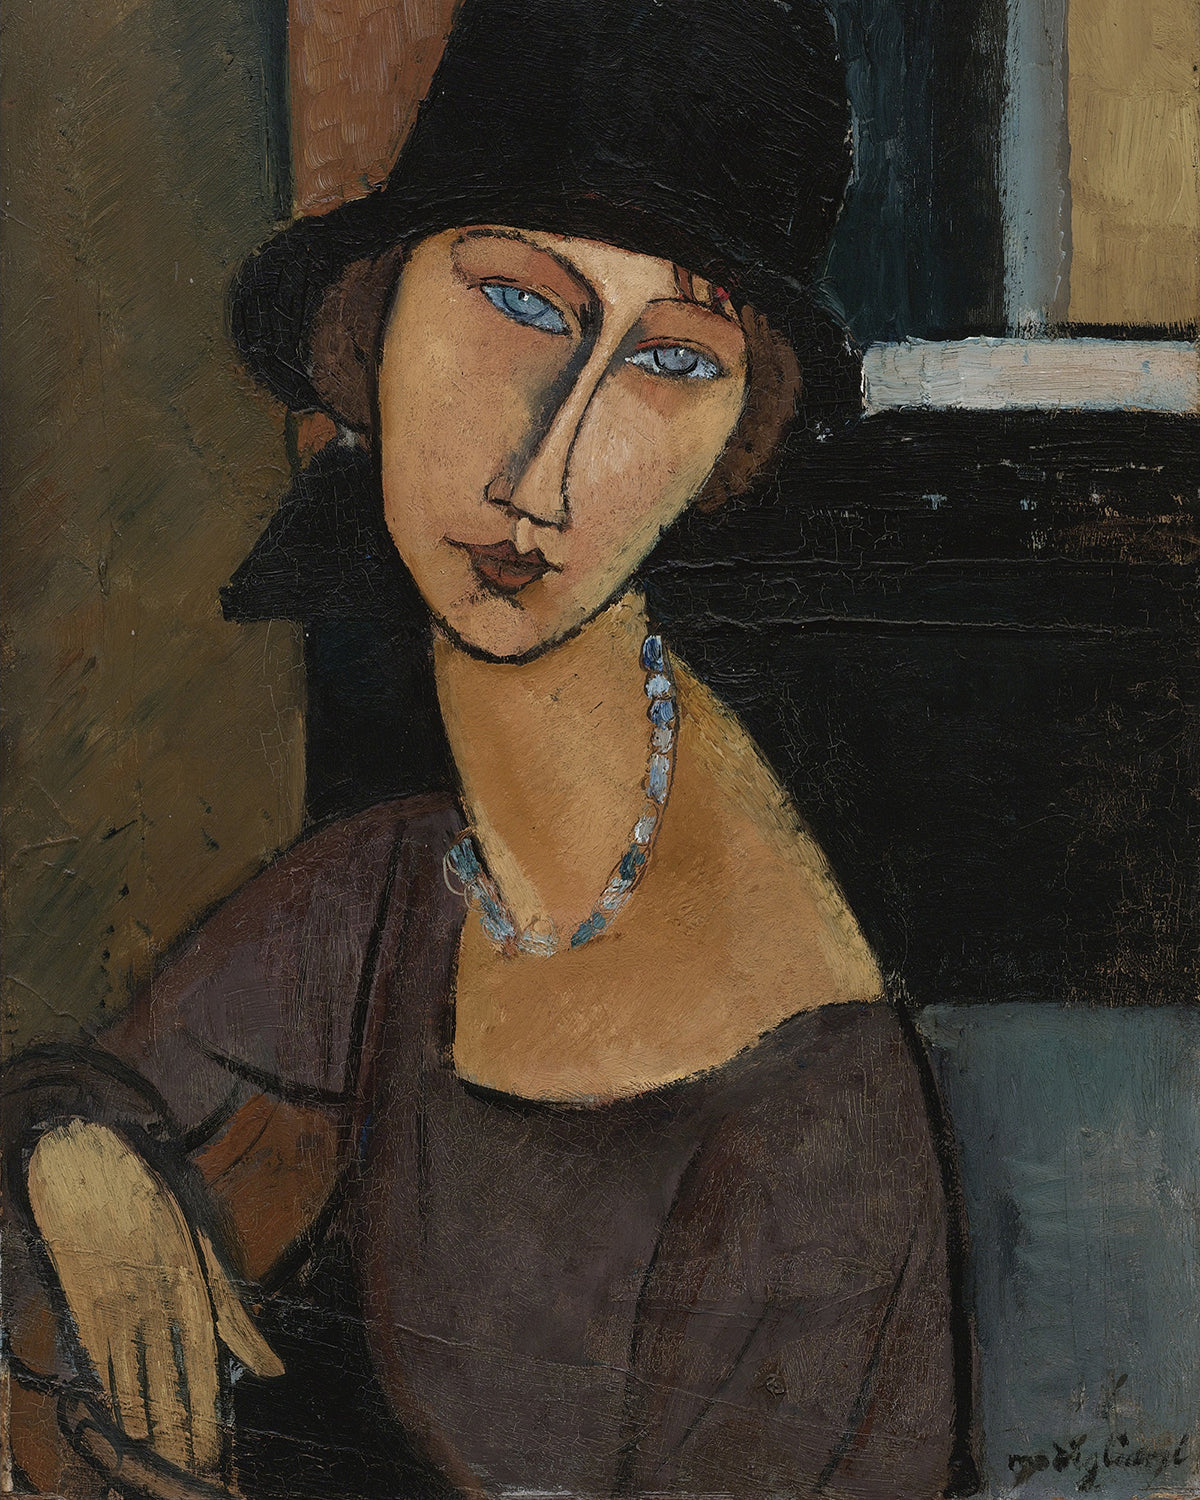 Jeanne Hebuterne with Hat and Necklace by Amedeo Modigliani